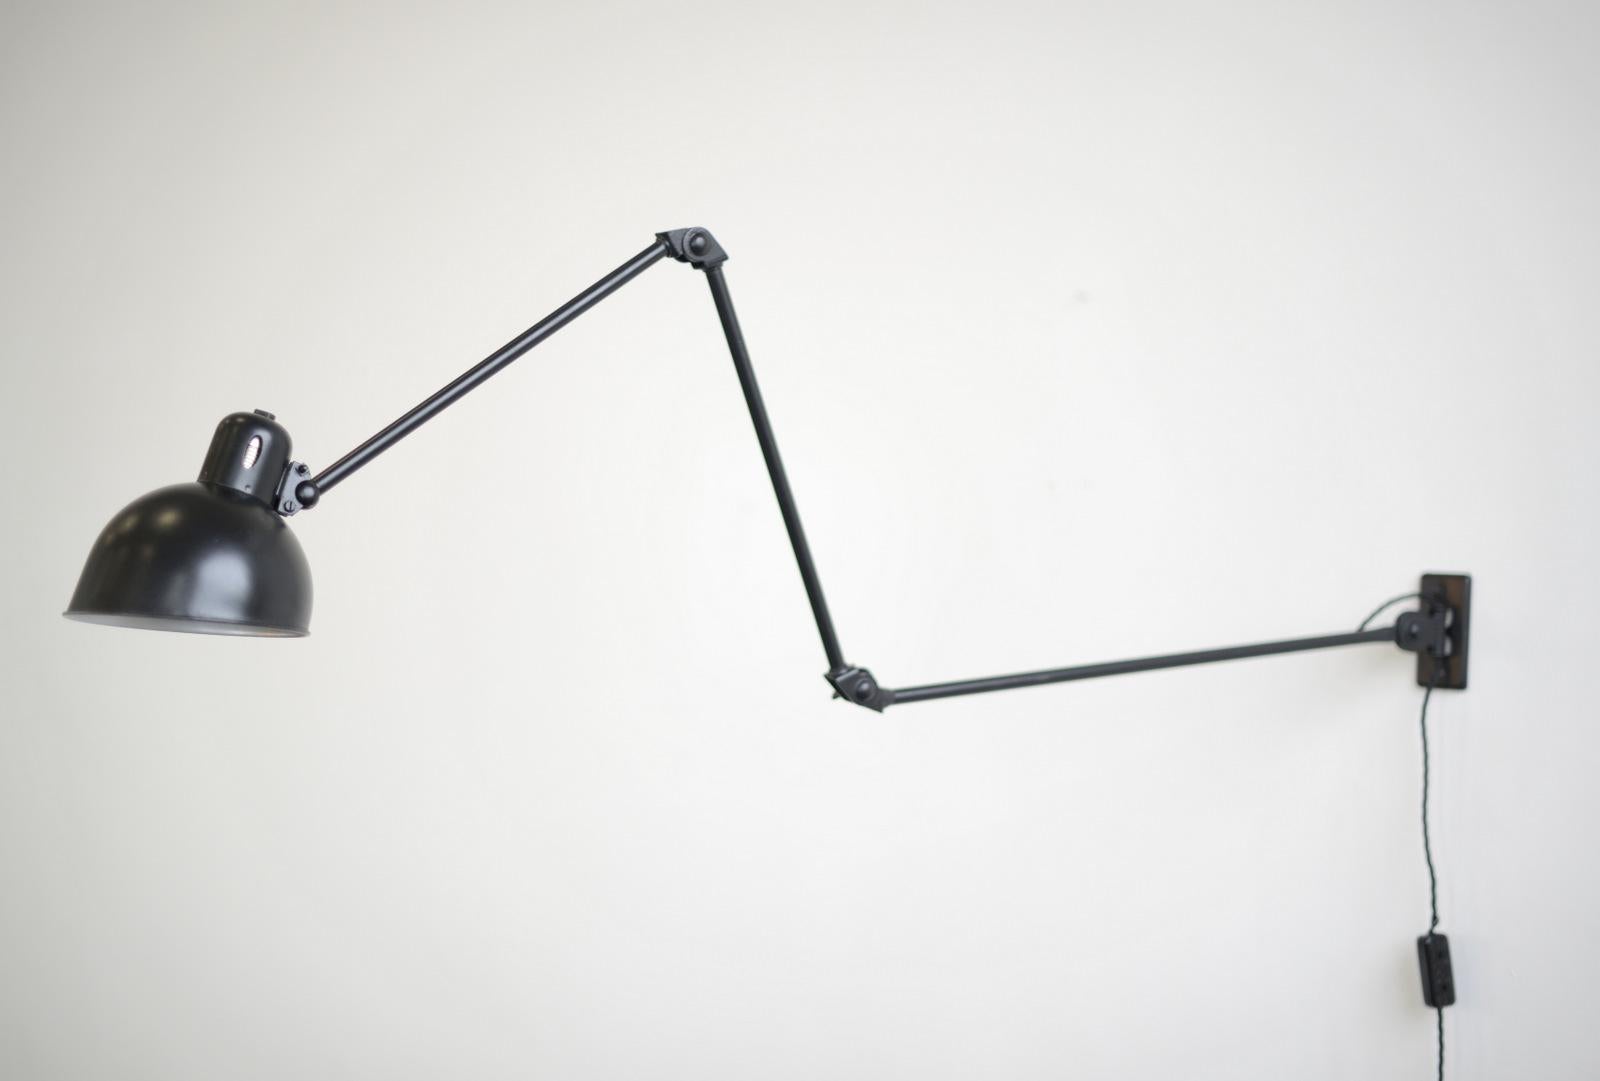 wall-mounted task lamp by Christian Dell For Karanda 

- Adjustable arms and shade
- Inline switch on the cord
- Takes E27 fitting bulbs
- Designed by Christian Dell for Karanda
- Austrian ~ 1920s
- Shade measures 16cm wide 
- Extends up to